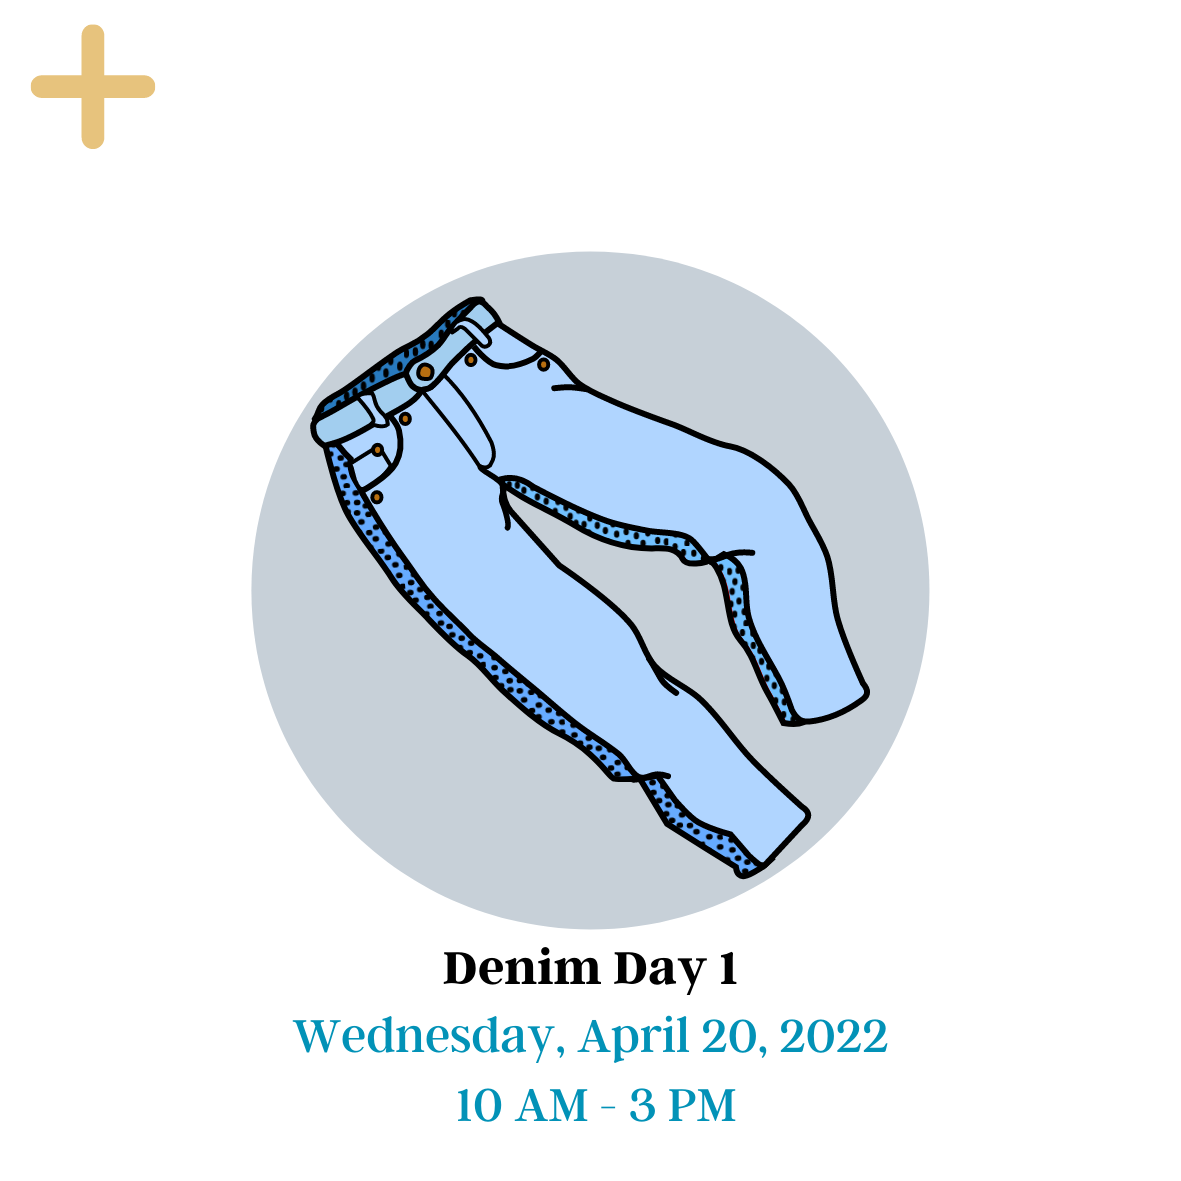 Denim day 1 cover page with an image of blue denim jeans within a gray circle. The yellow button on the top can be clicked and will provide more information. The picture has date at the bottom: Wednesday, April 27, 2022